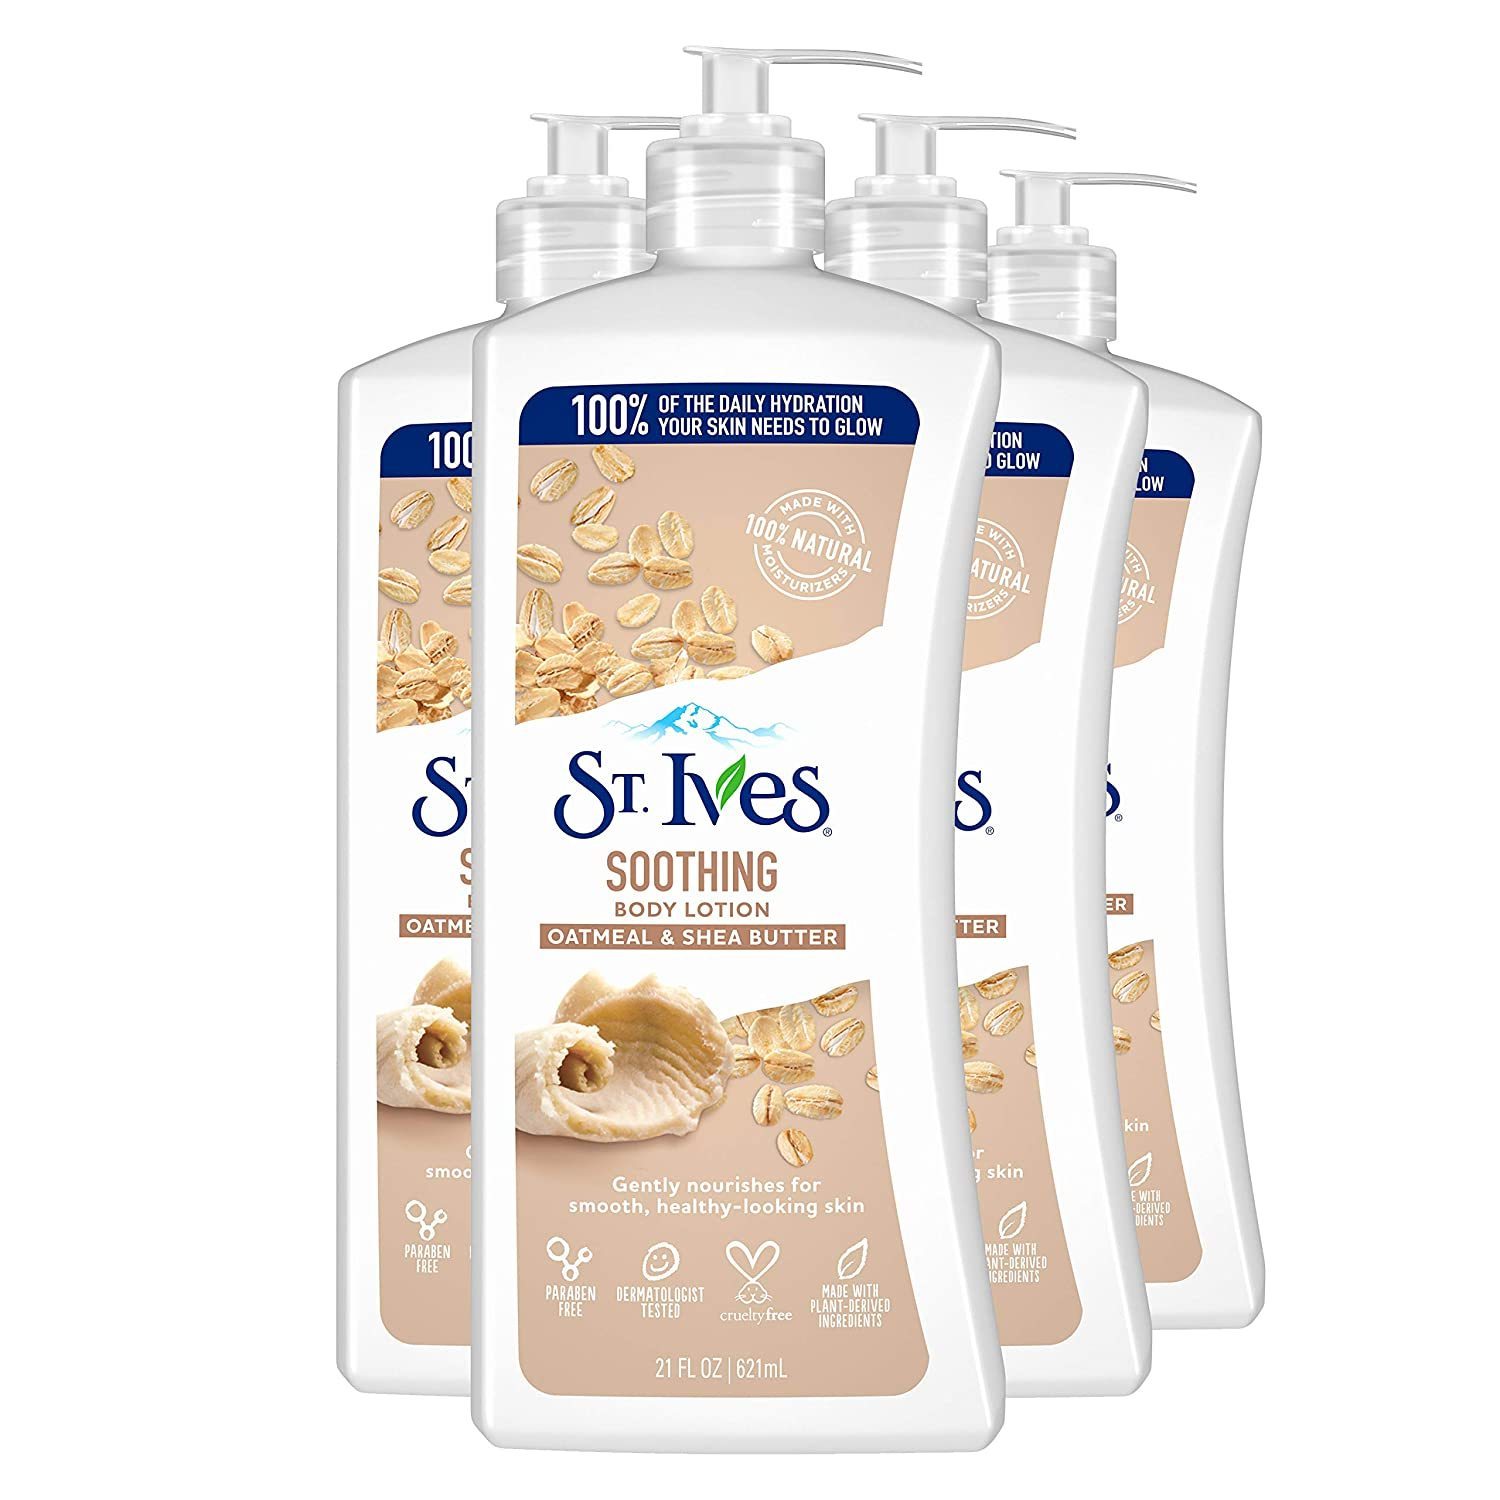 St. Ives Soothing Hand & Body Lotion Moisturizer,Oatmeal & Shea Butter 21 OZ,4Pk